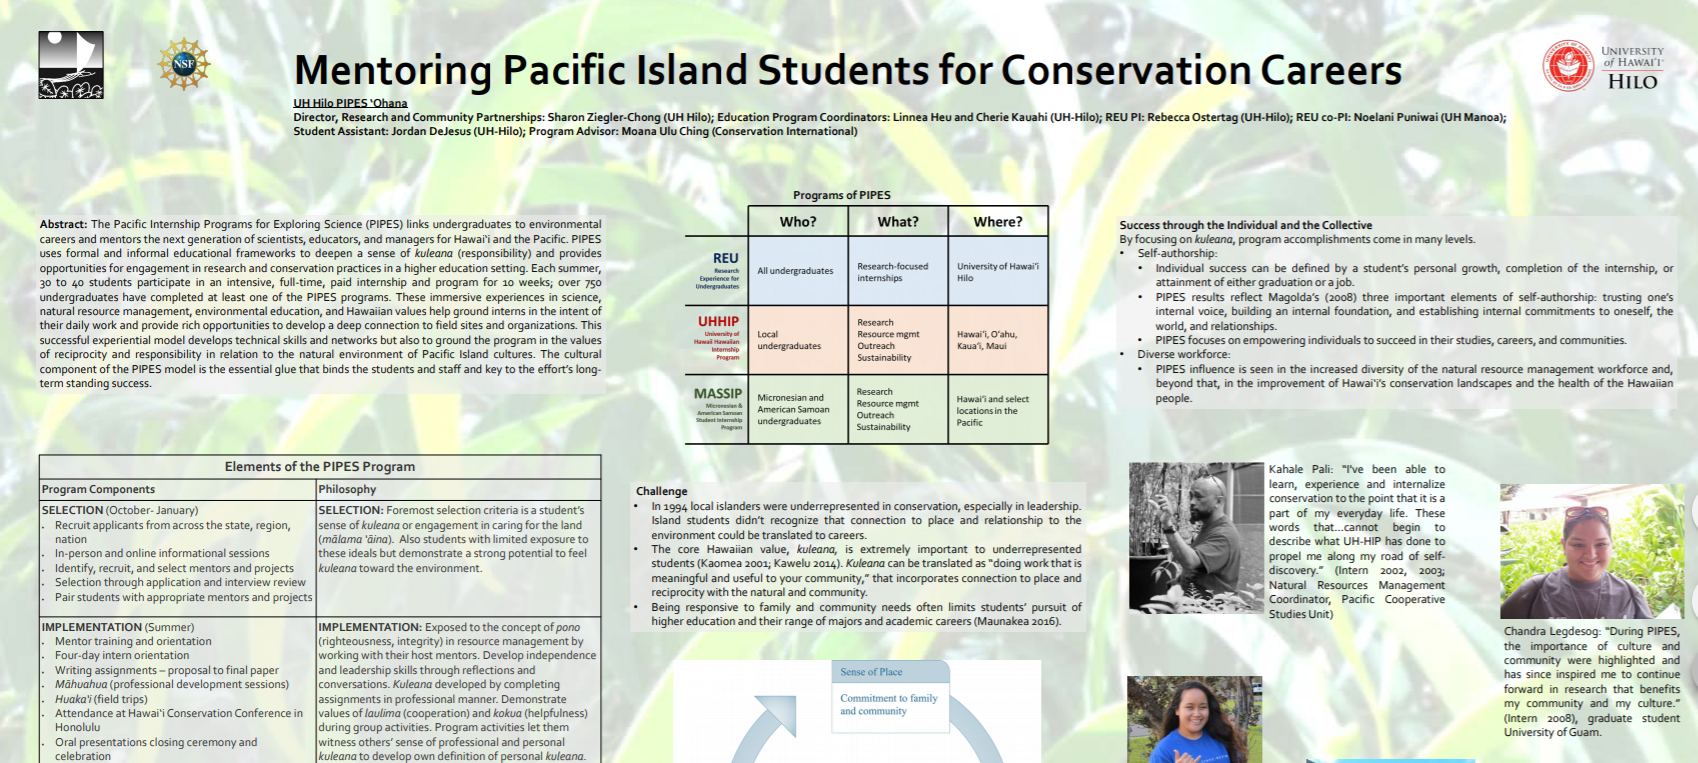 Mentoring Pacific Island Students for Conservation